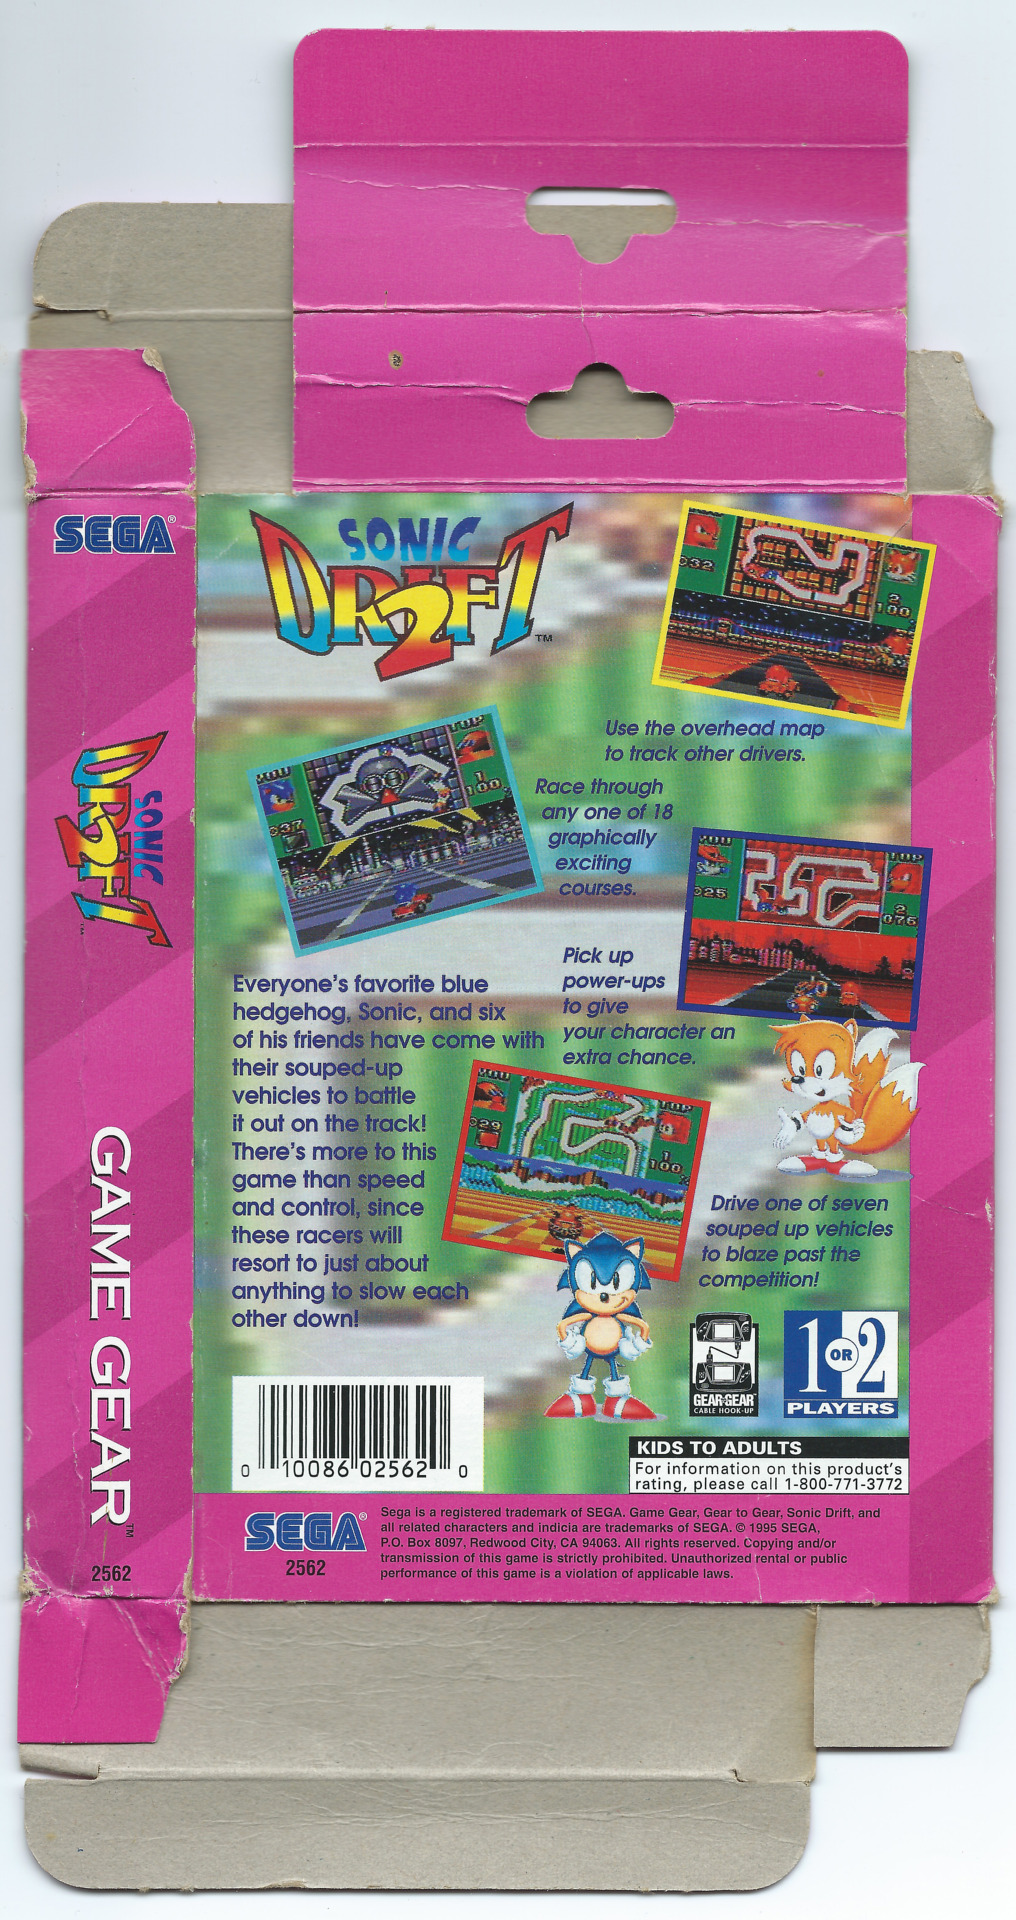 Sonic The Hedgeblog on X: The North American ad for 'Sonic Battle' on the  GBA.  / X